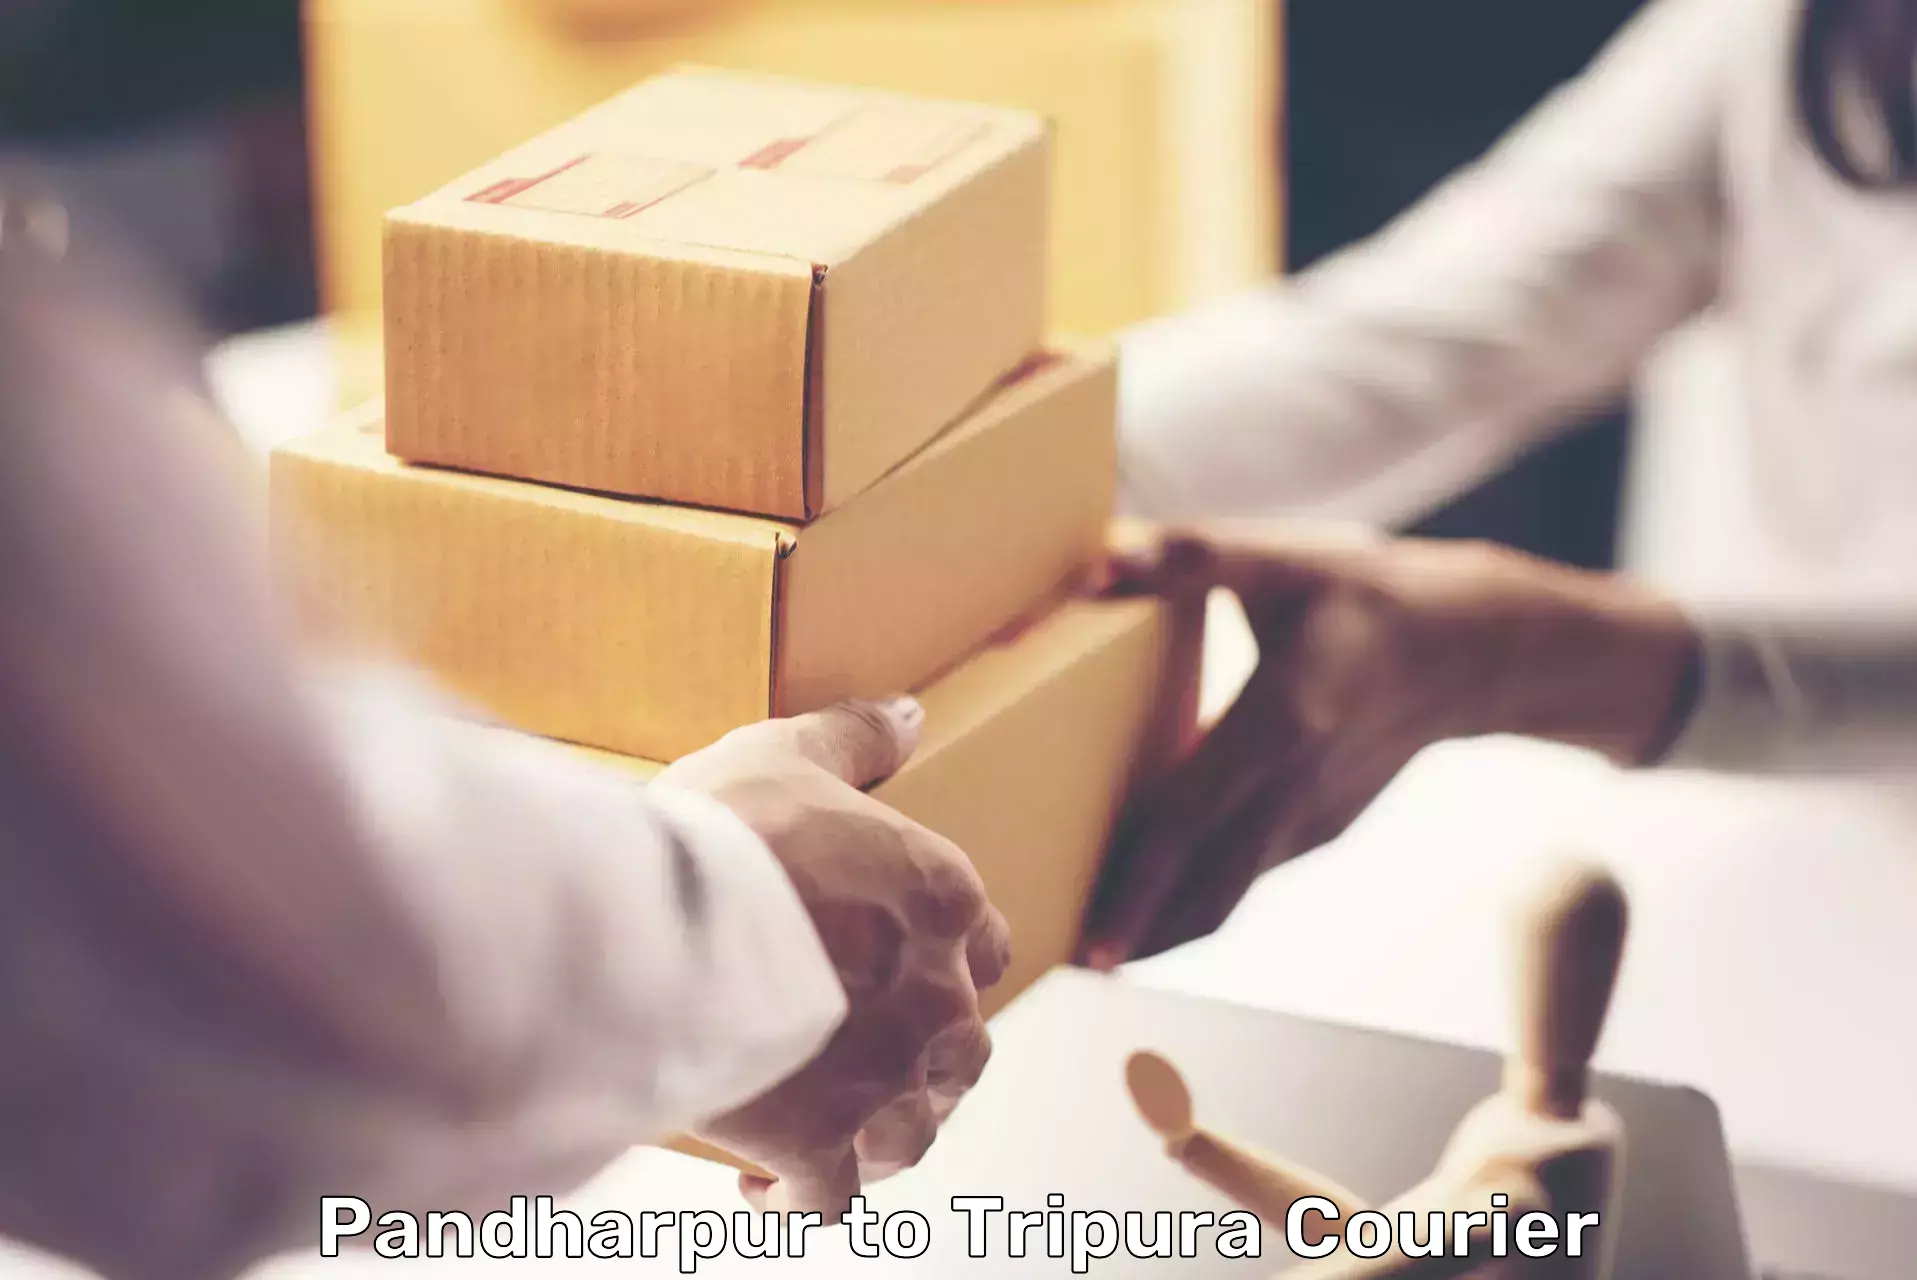 Nationwide courier service Pandharpur to Udaipur Tripura